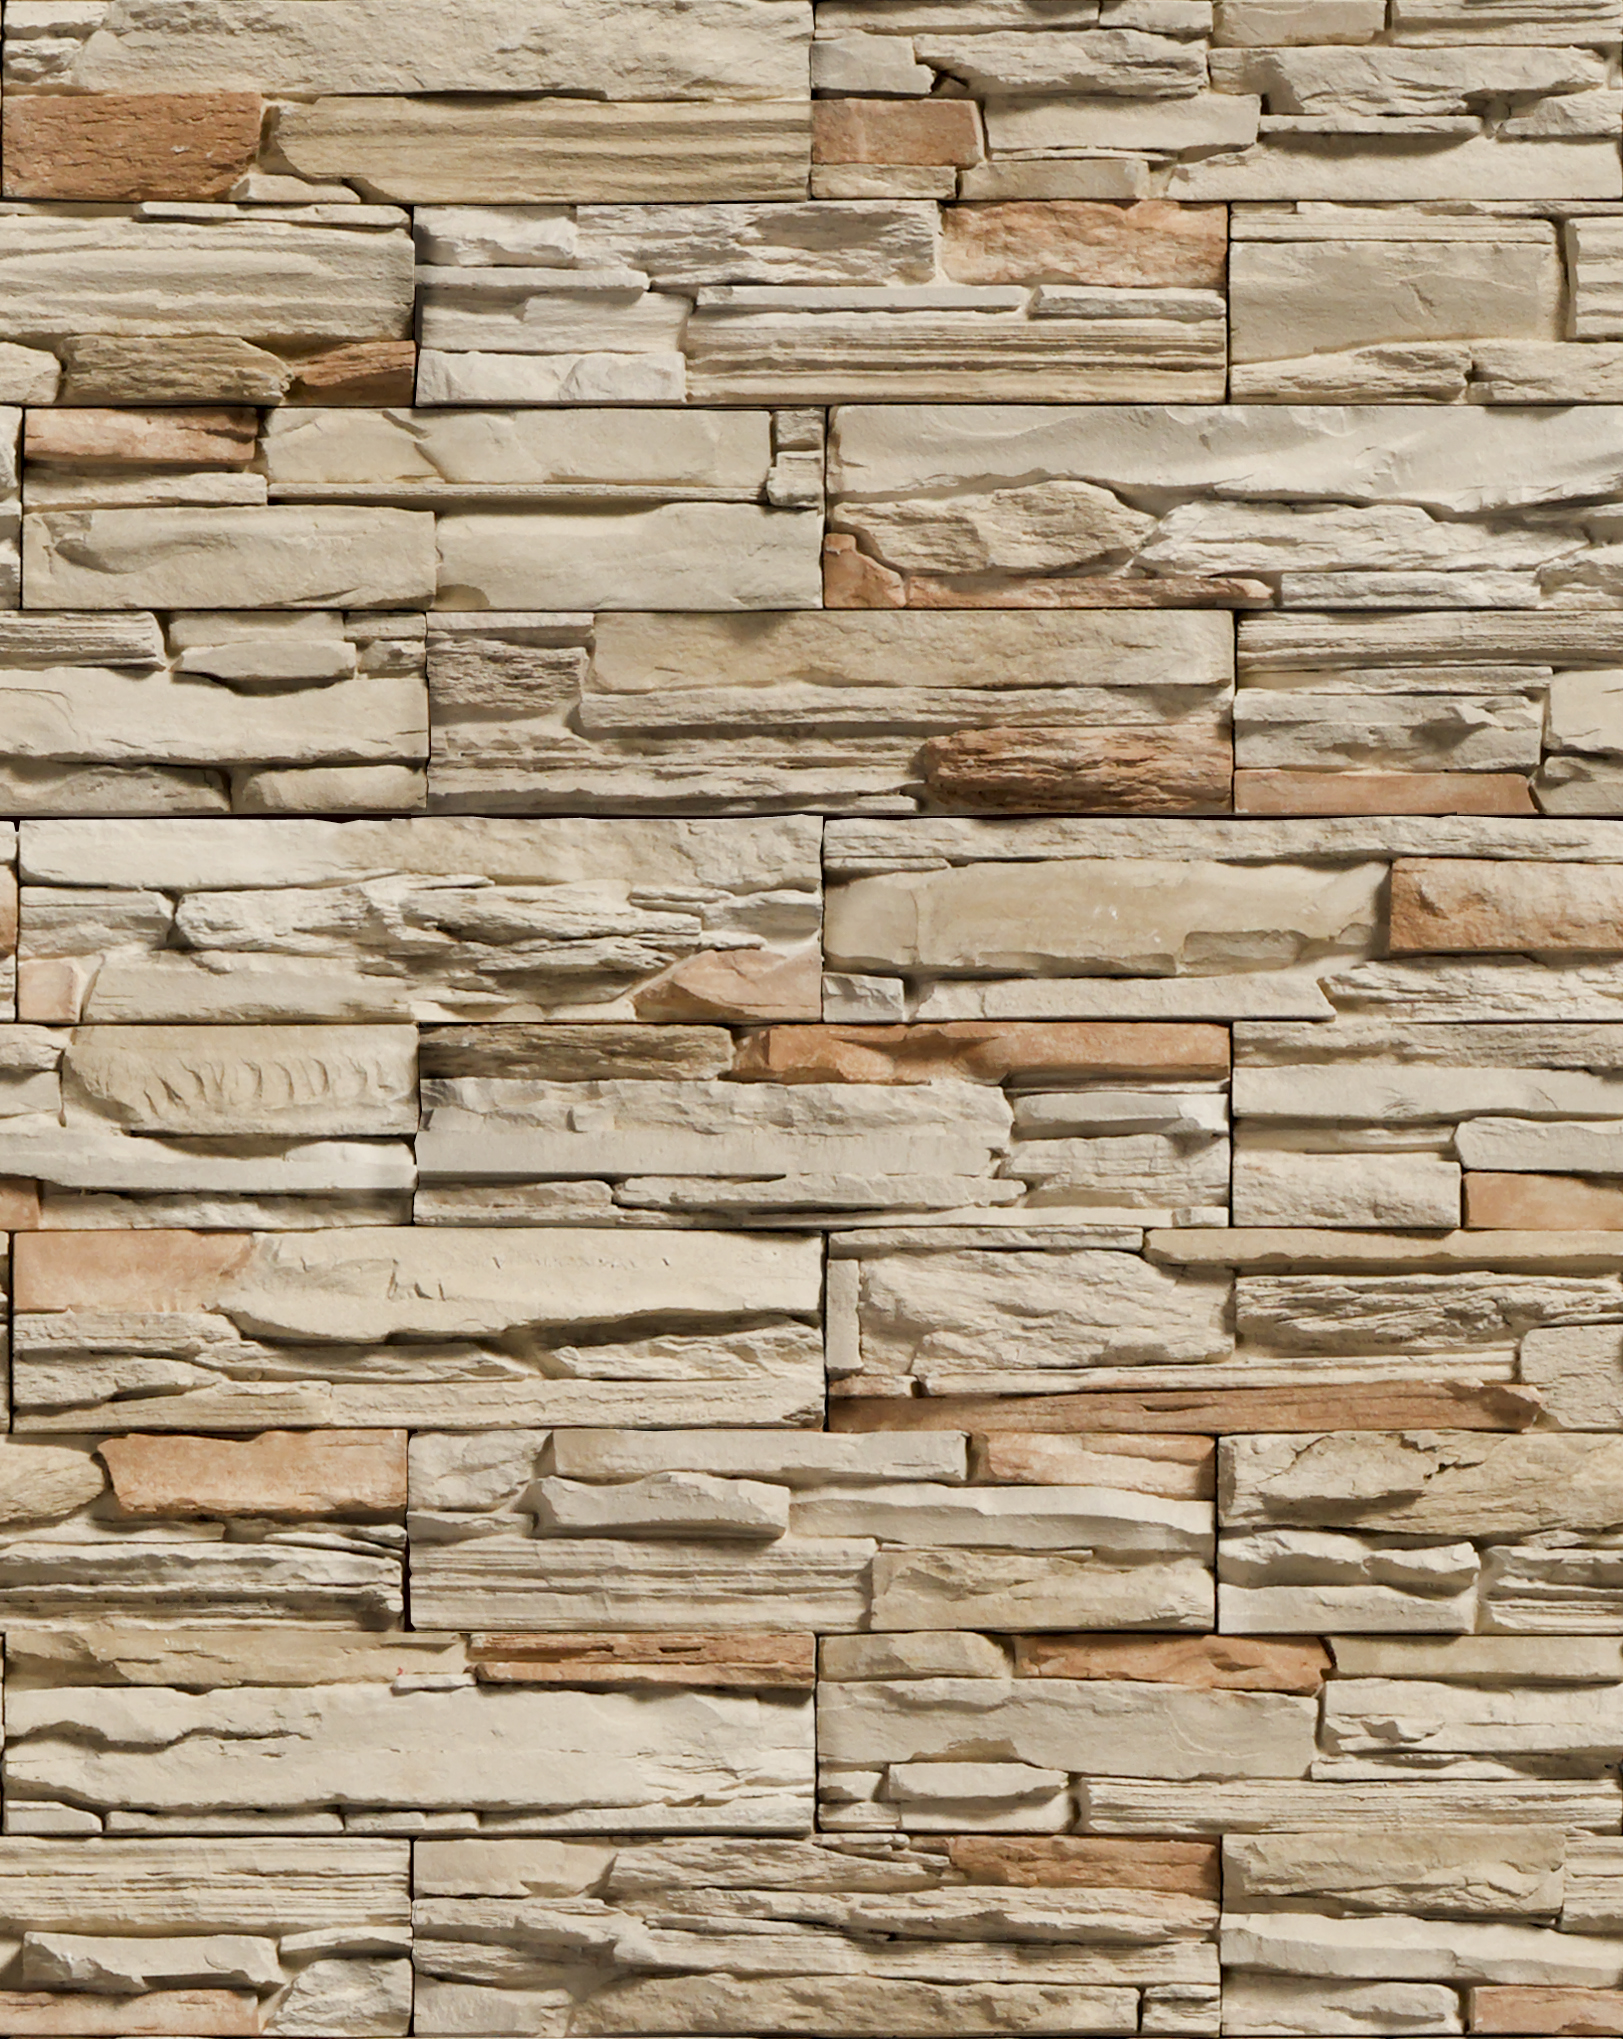 wild stone, wall, texture stone, stone wall, download background, stone background